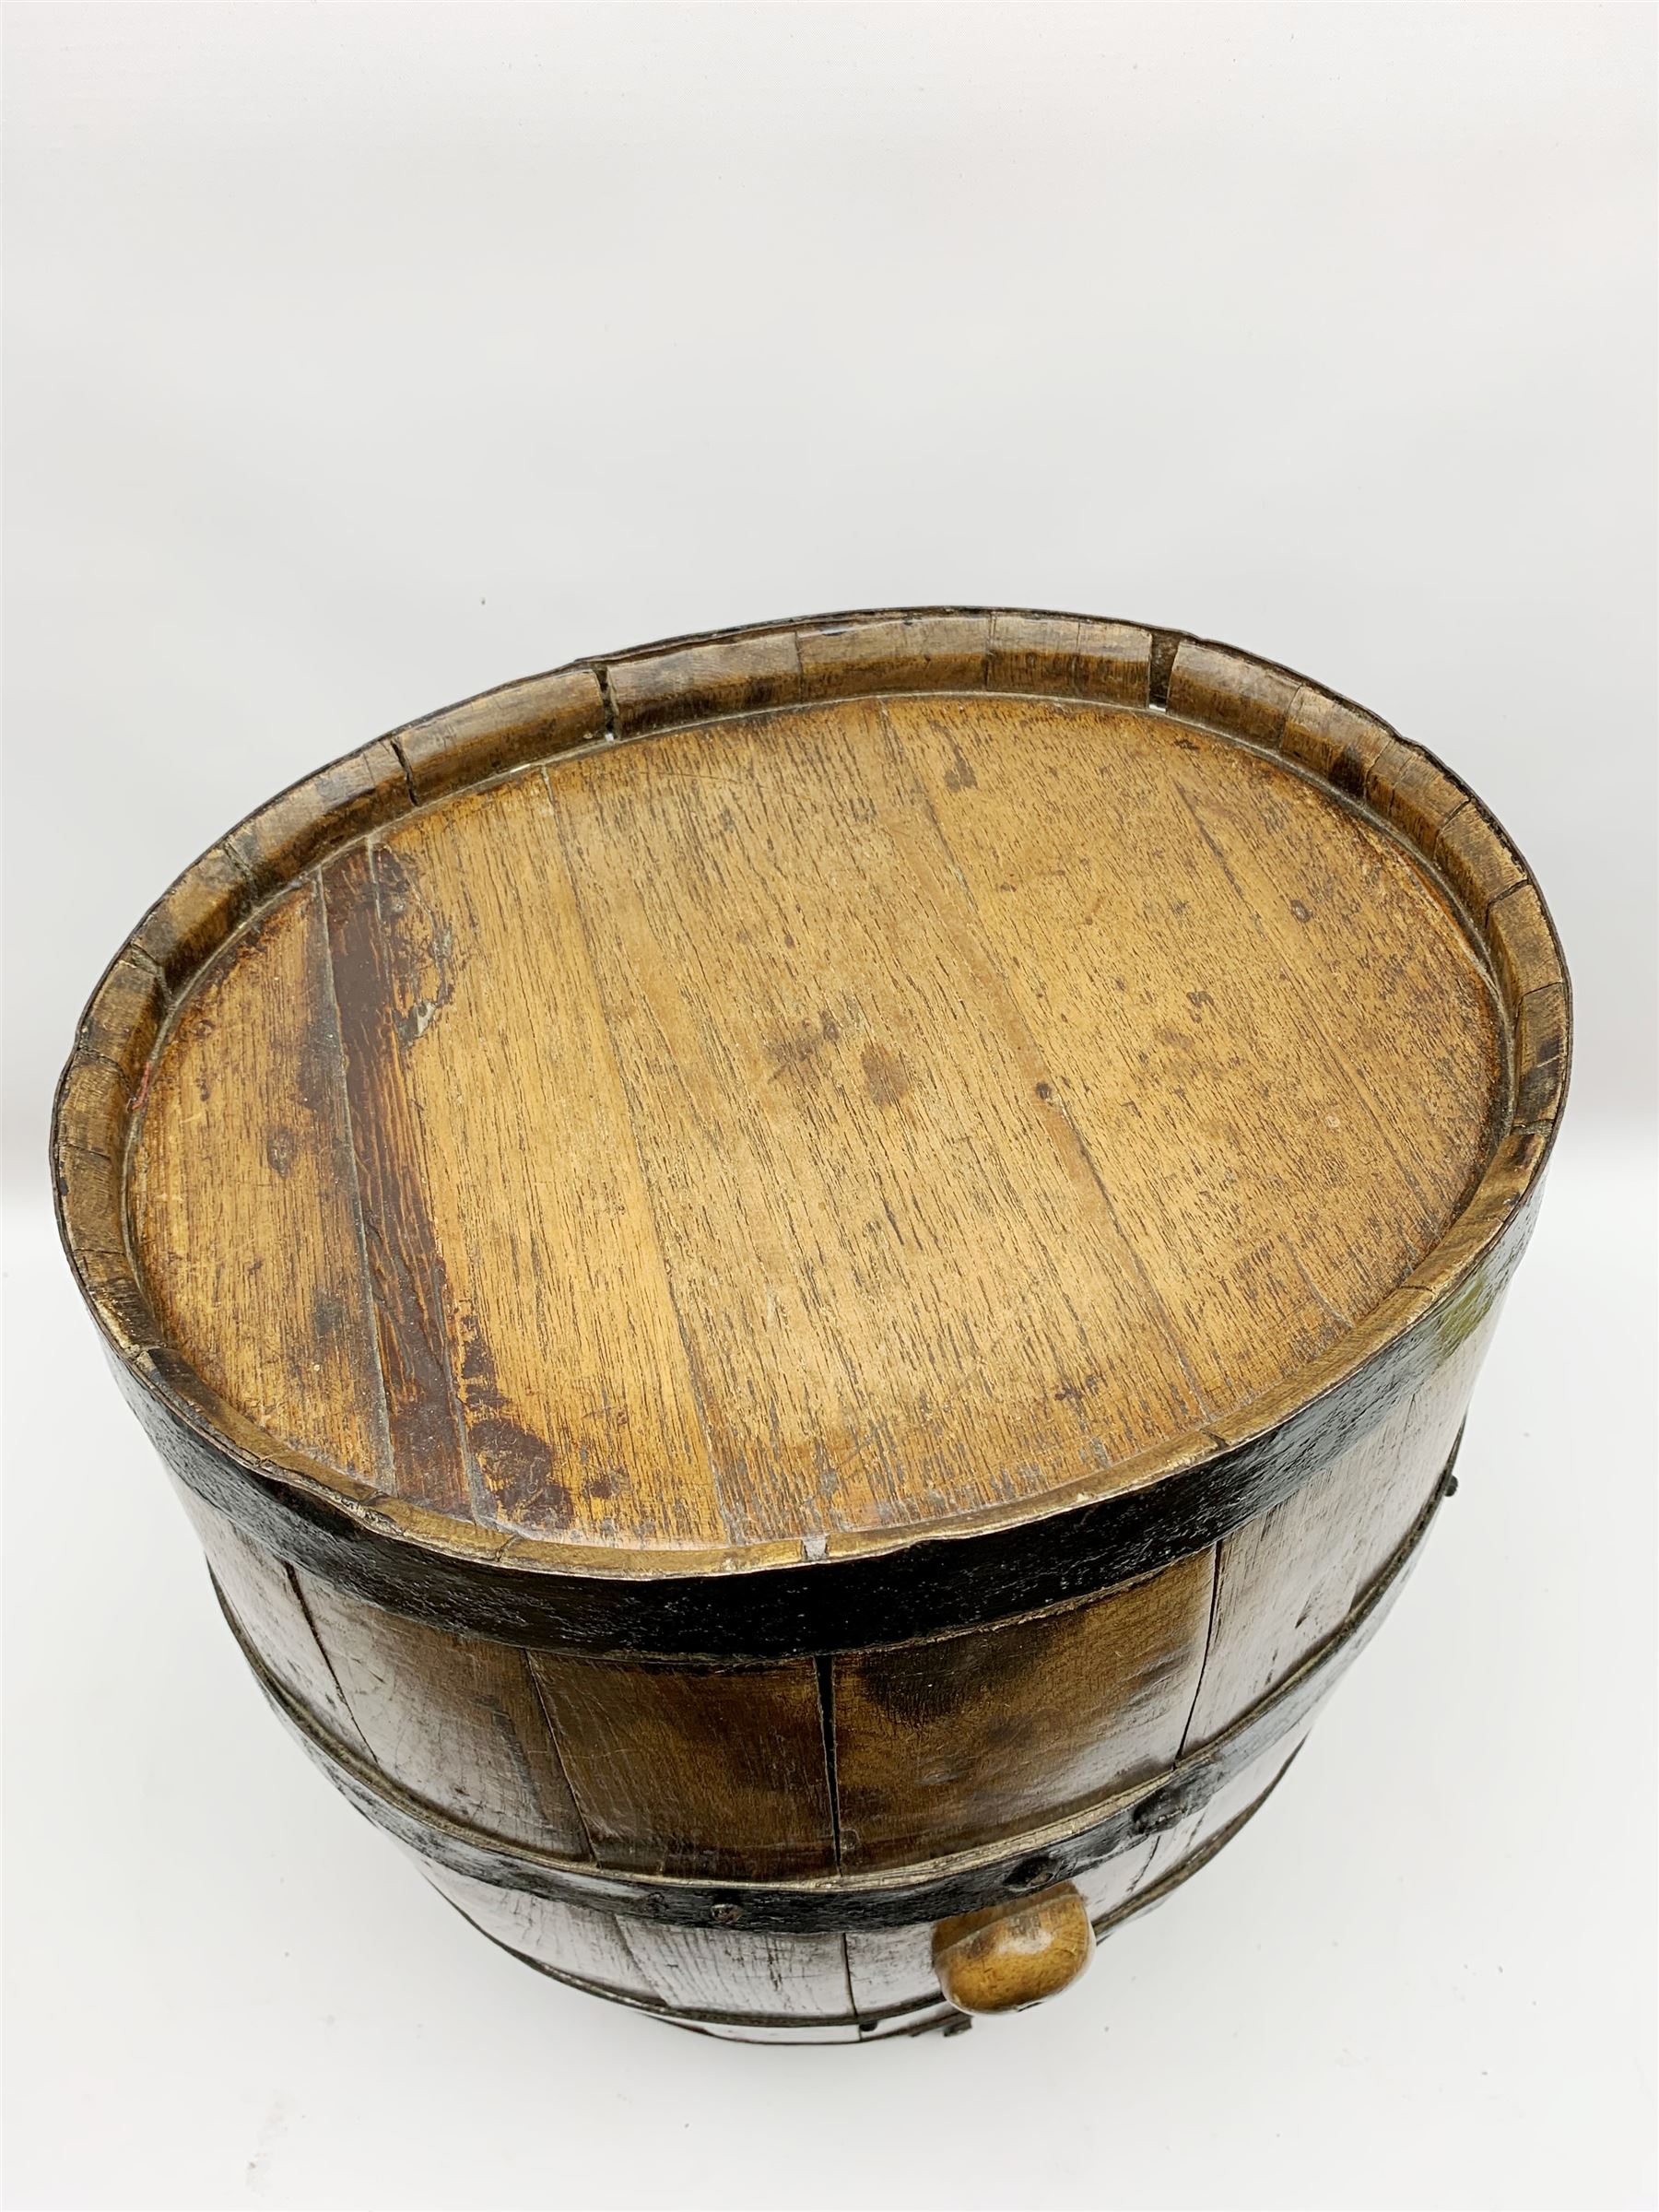 19th century oak and metal bound coopered barrel - Image 2 of 5